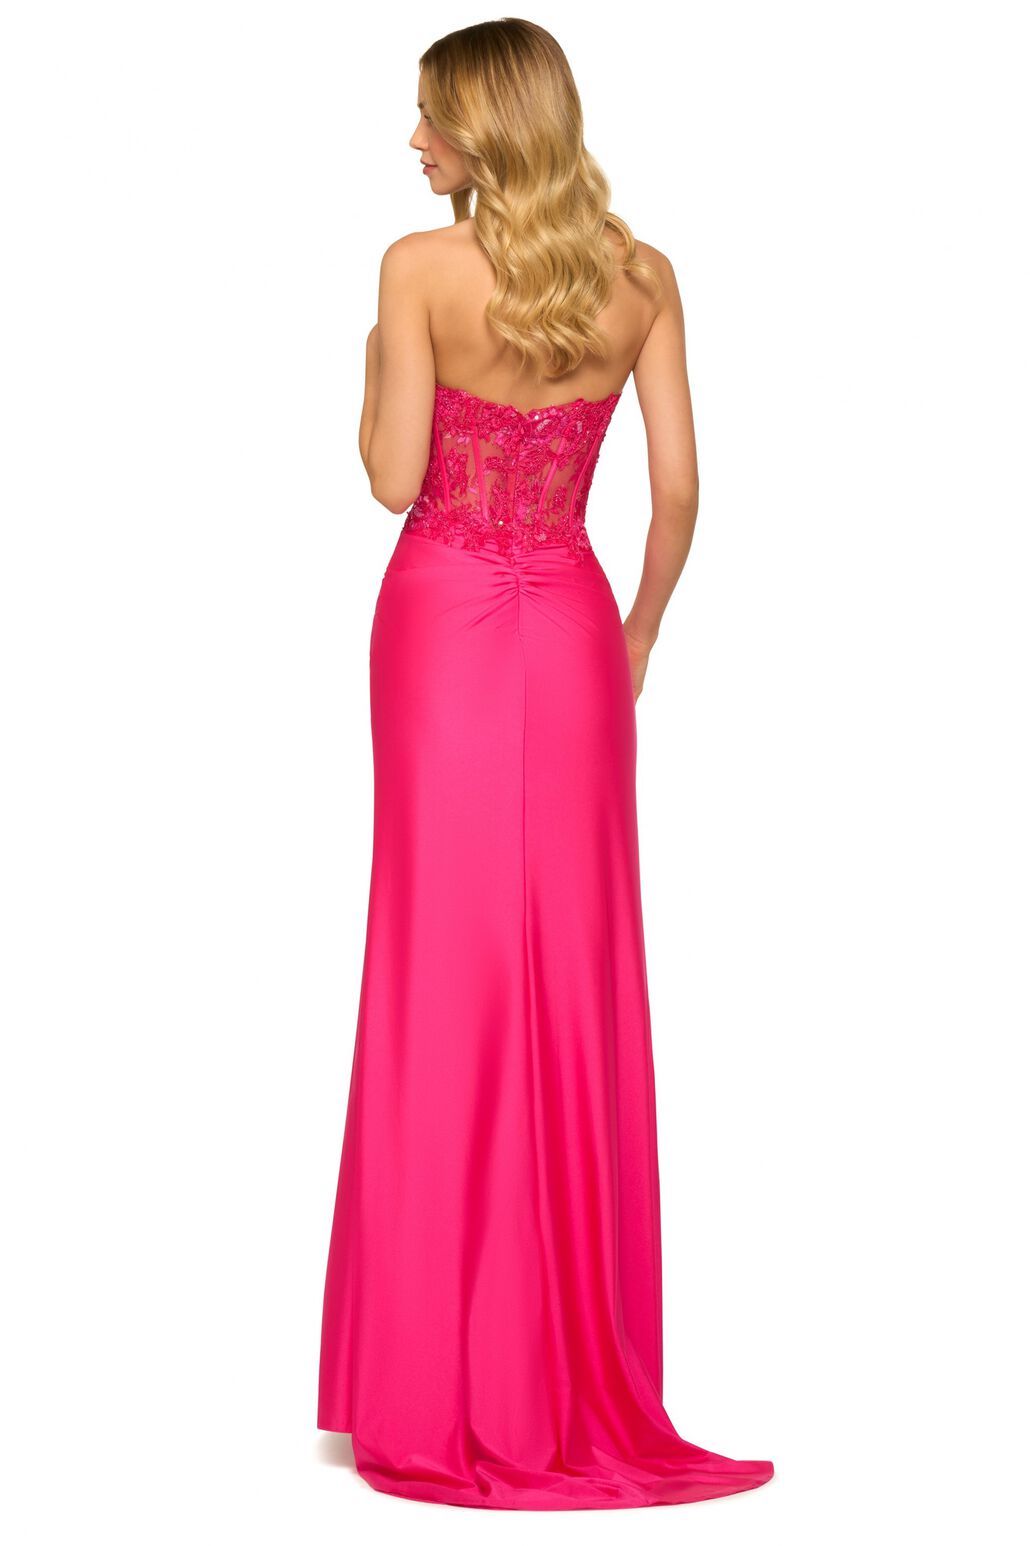 Stunning Sherri Hill dress from Madeline's Boutique in Toronto and Boca Raton - Style 55334: Strapless leaf lace corset bodice and ruched jersey skirt with a sexy slit. Perfect for prom!